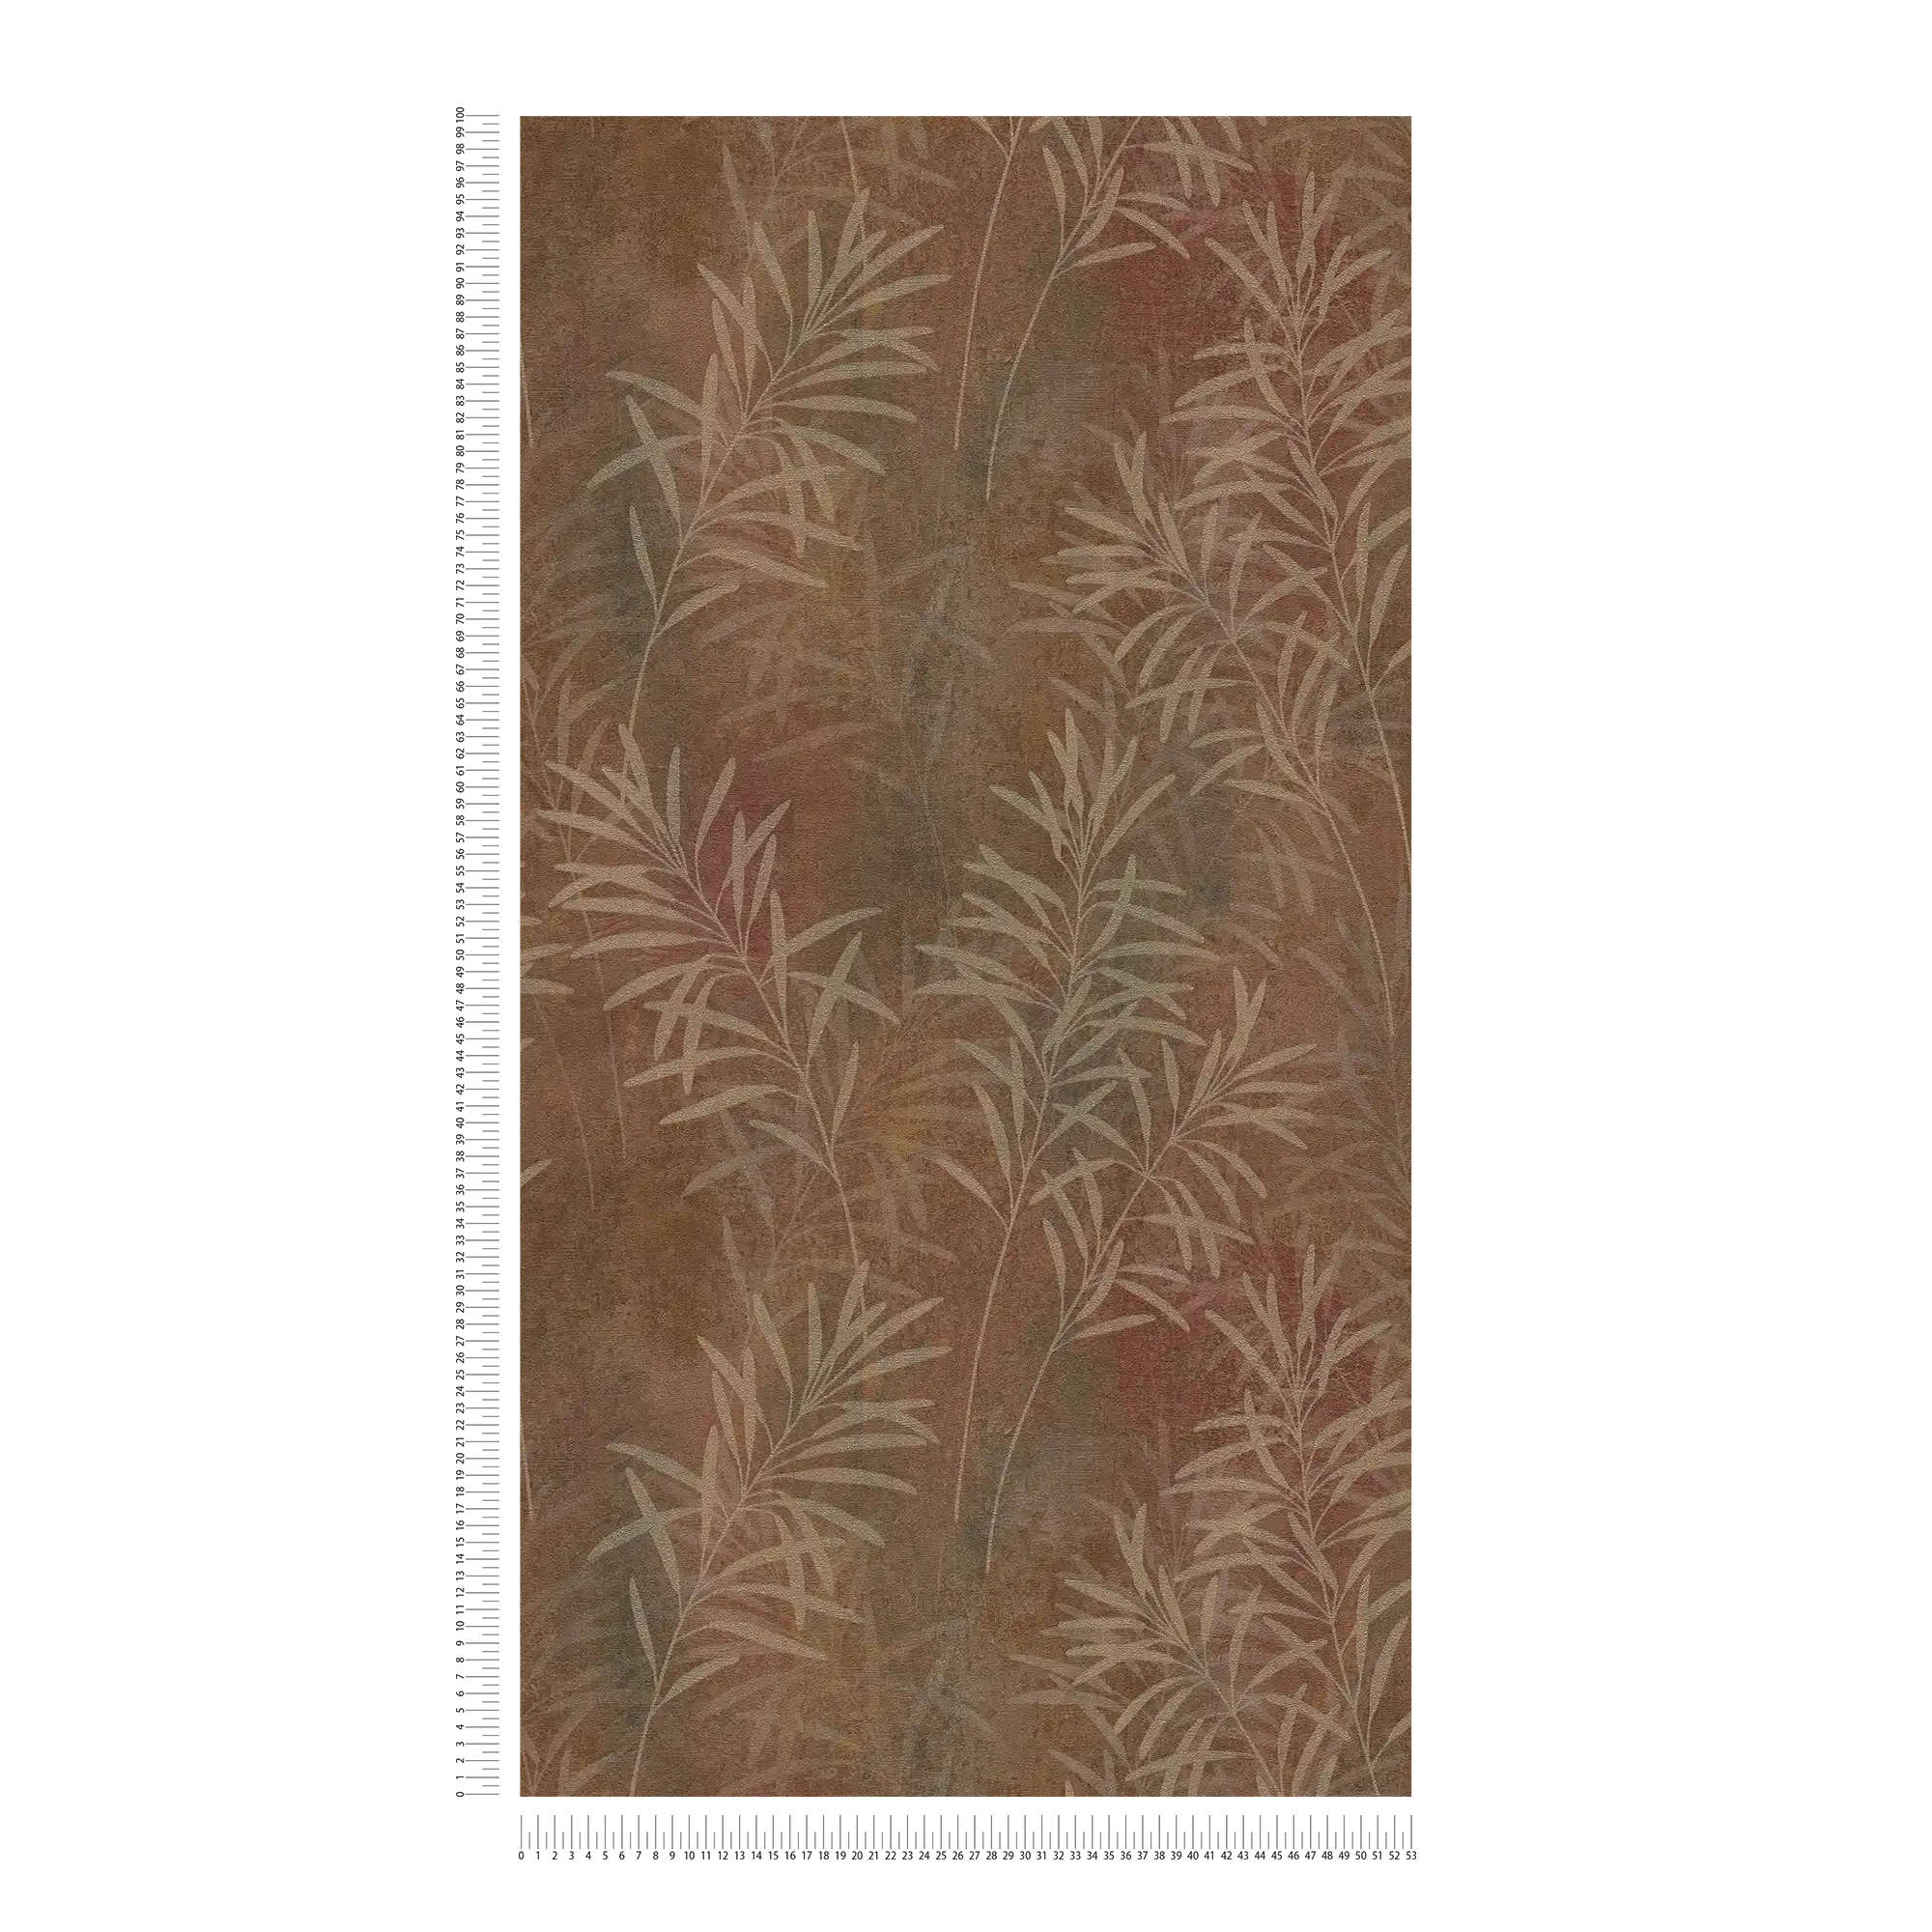             Floral non-woven wallpaper with grass pattern and fine structure - brown, beige, metallic
        